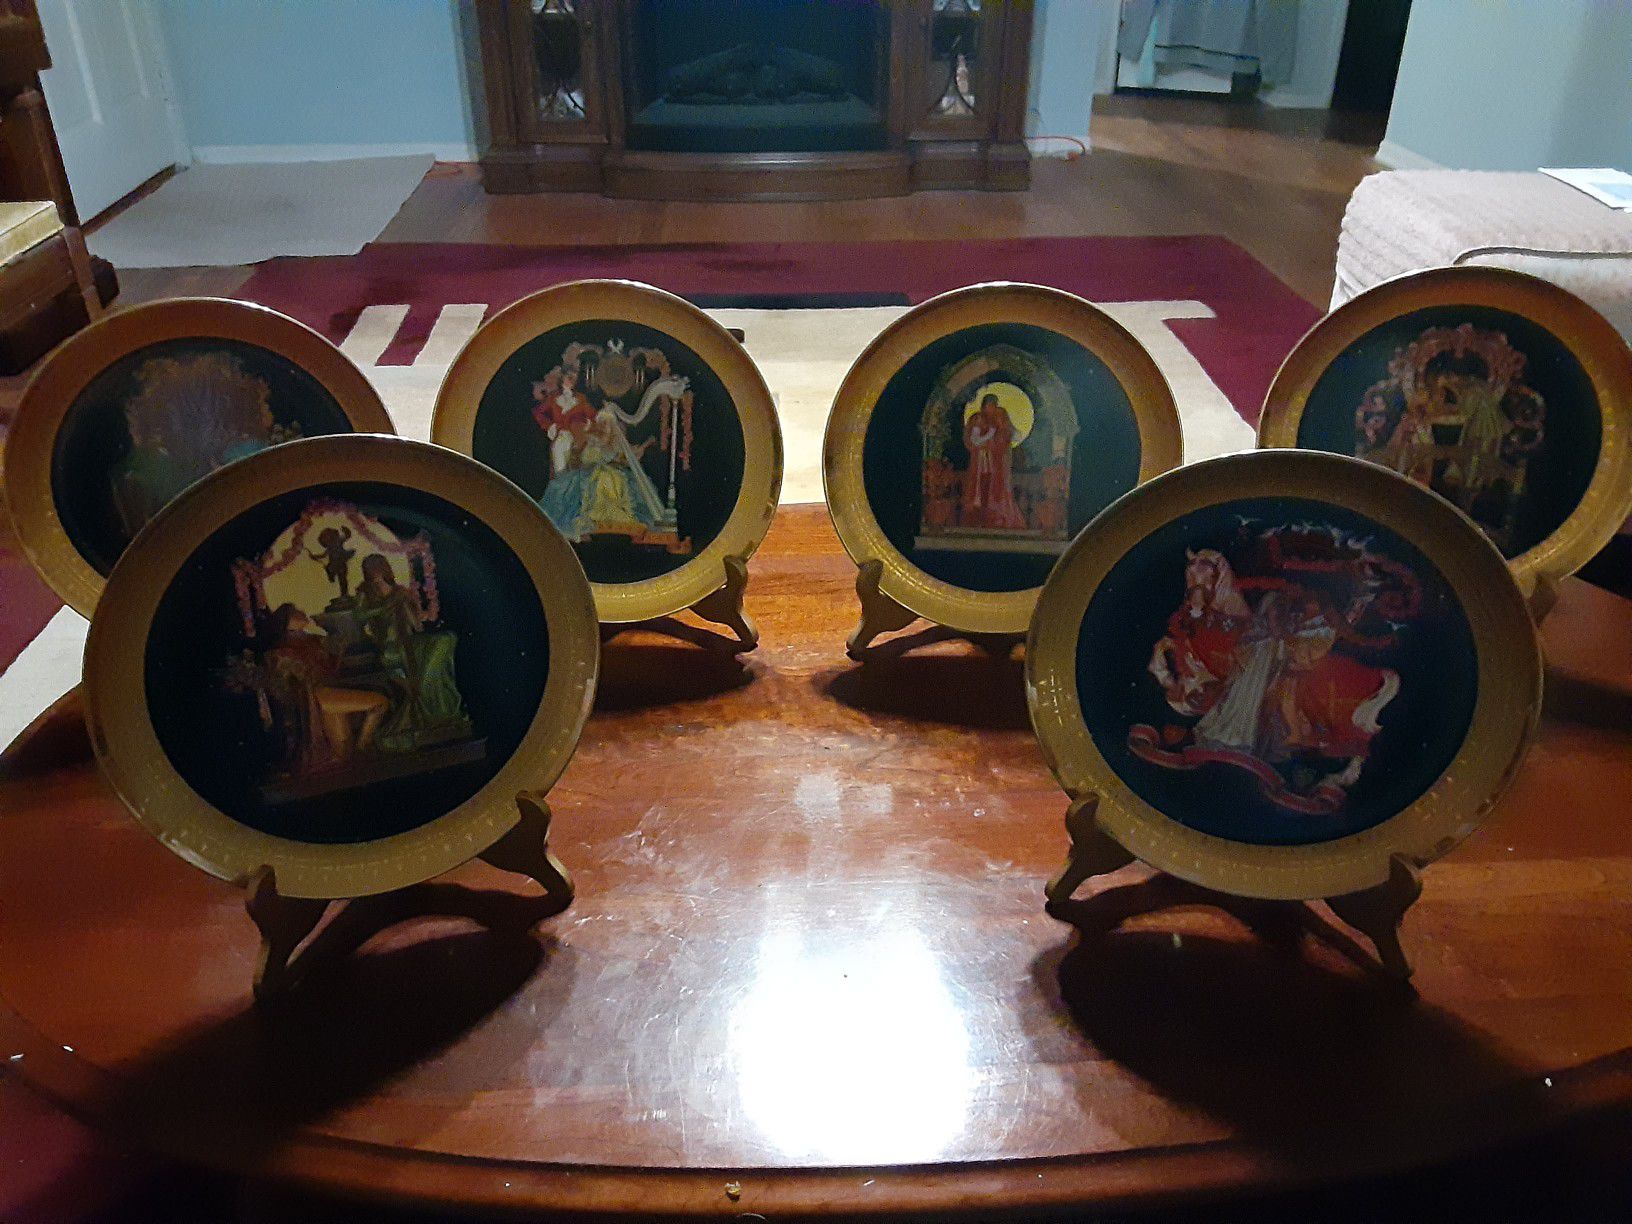 6 Beautiful Looking VINTAGE Plates and Stands By Loves Precious Moments